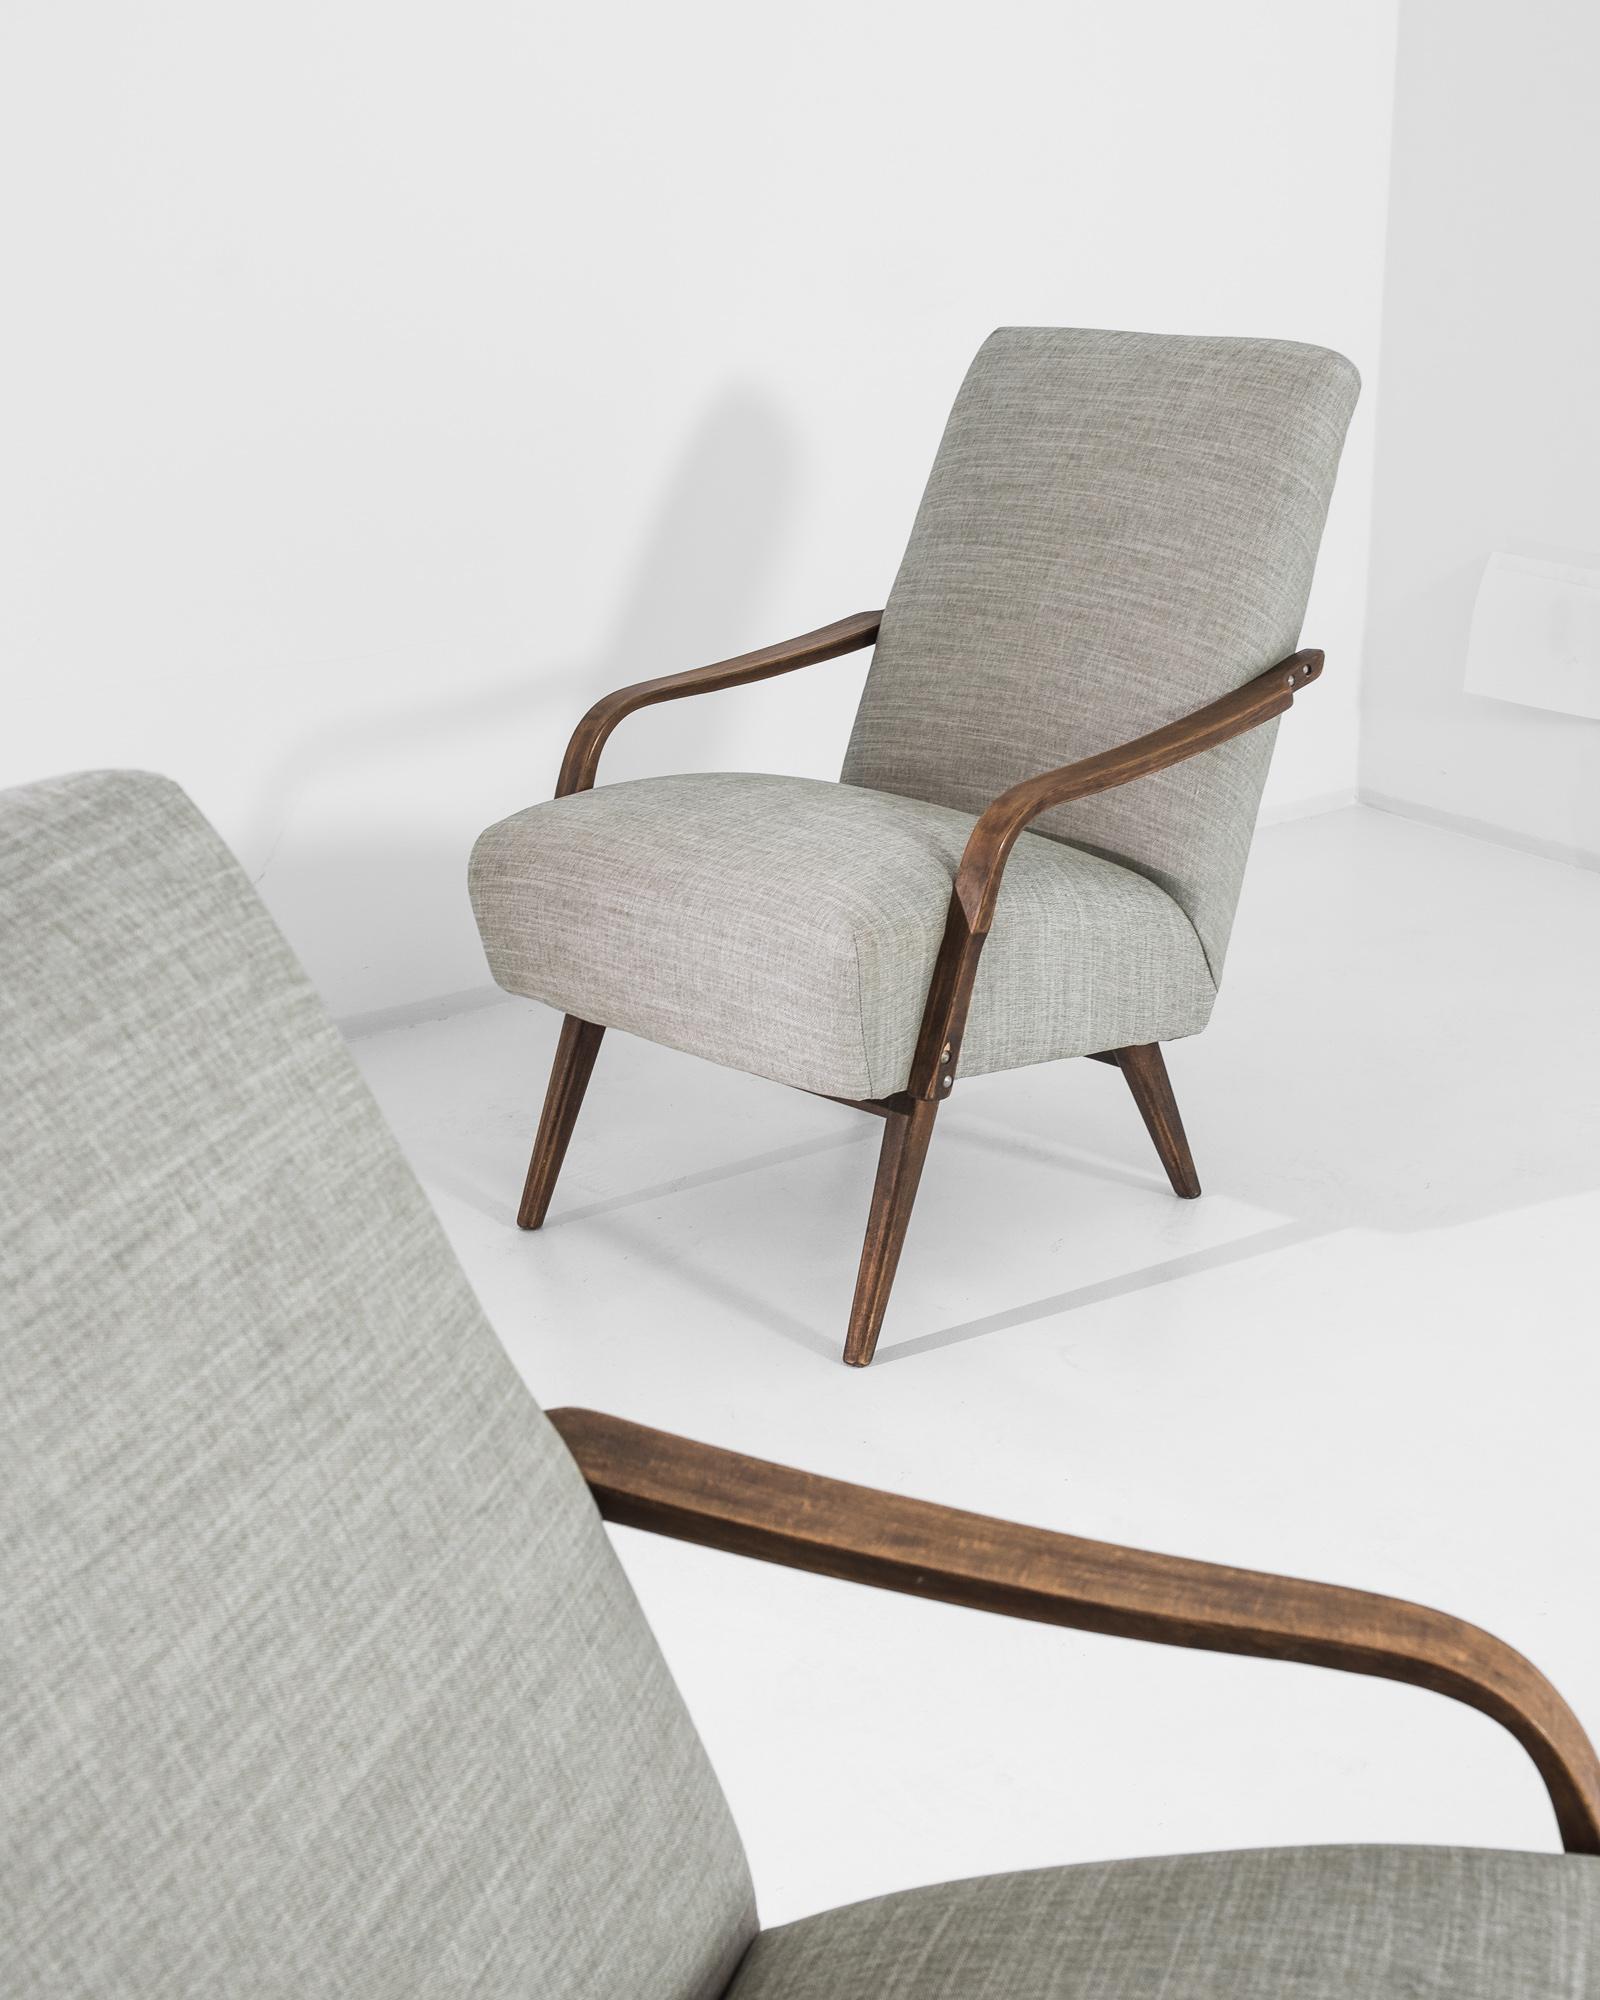 A pair of armchairs produced in the former Czechoslovakia. This 1960s design is re-upholstered in an updated ecru fabric, the neutral tone was chosen to compliment the natural brown of the hardwood frame. Comfortable angles and clean lines, the